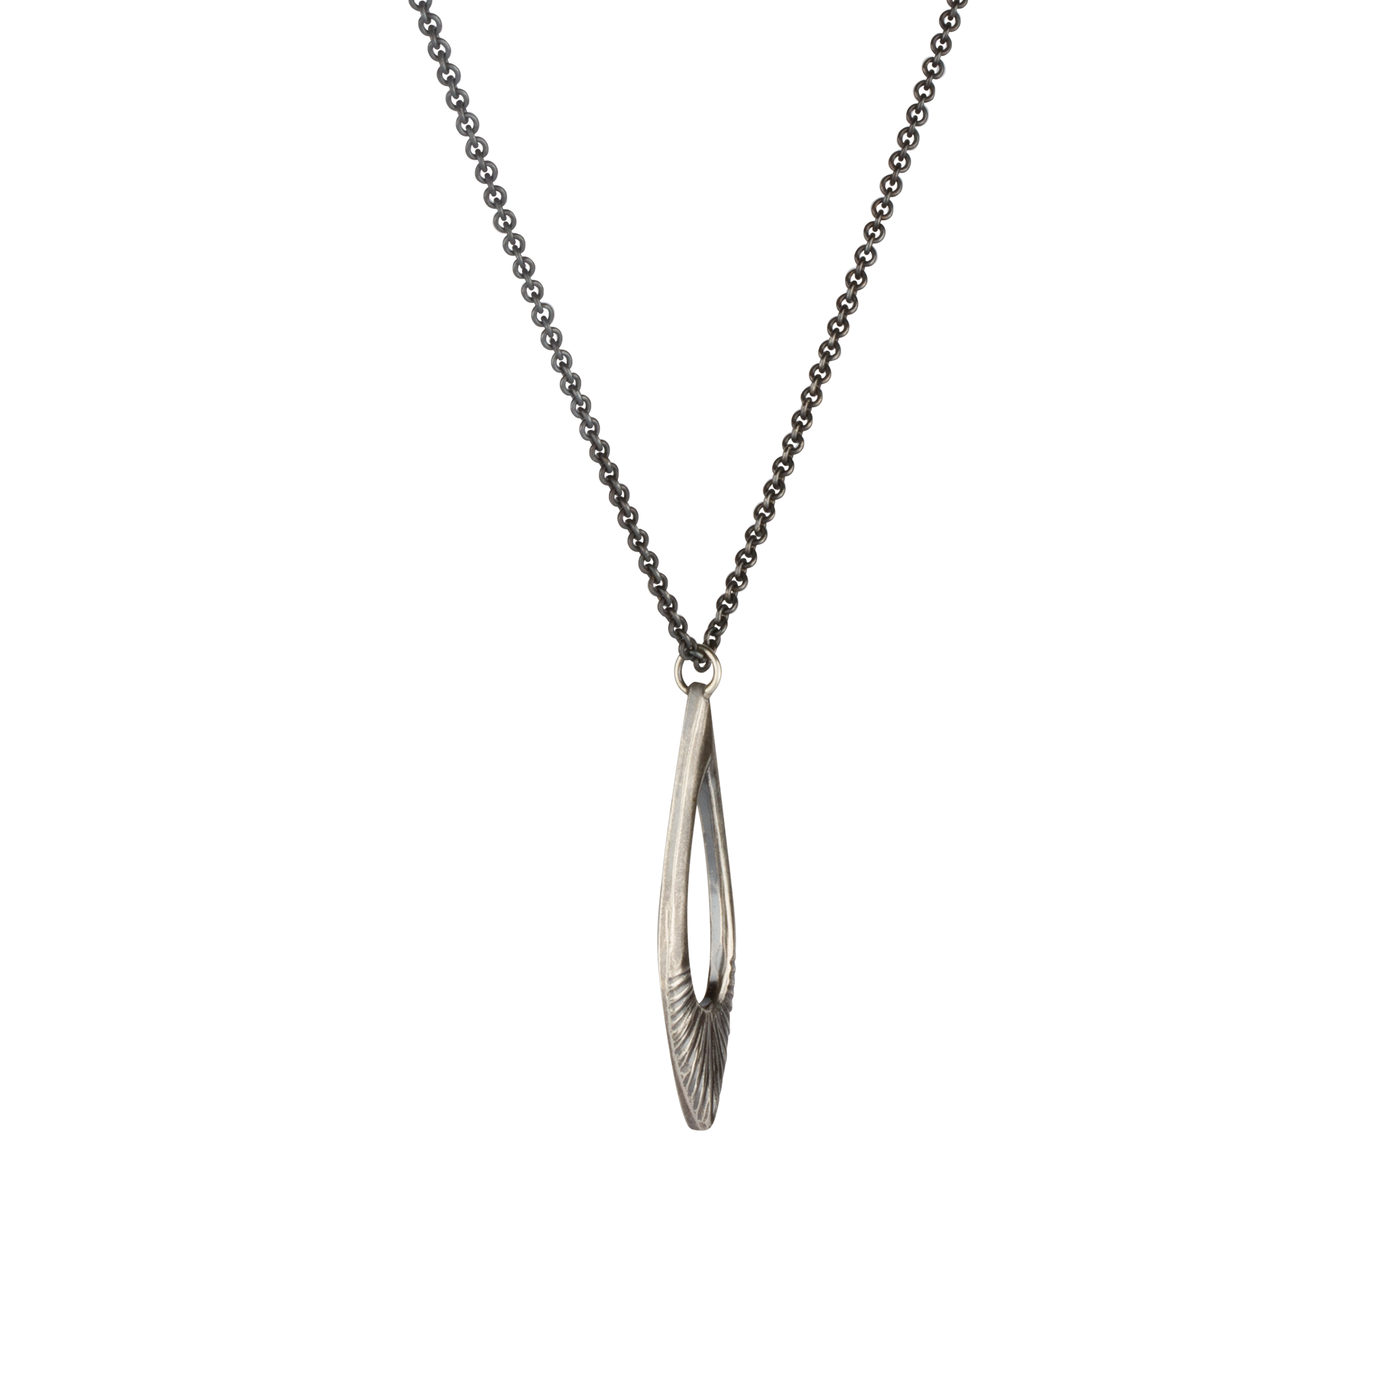 Side view of Oblong petal shaped pendant with a carved sunburst texture in oxidized sterling silver on white